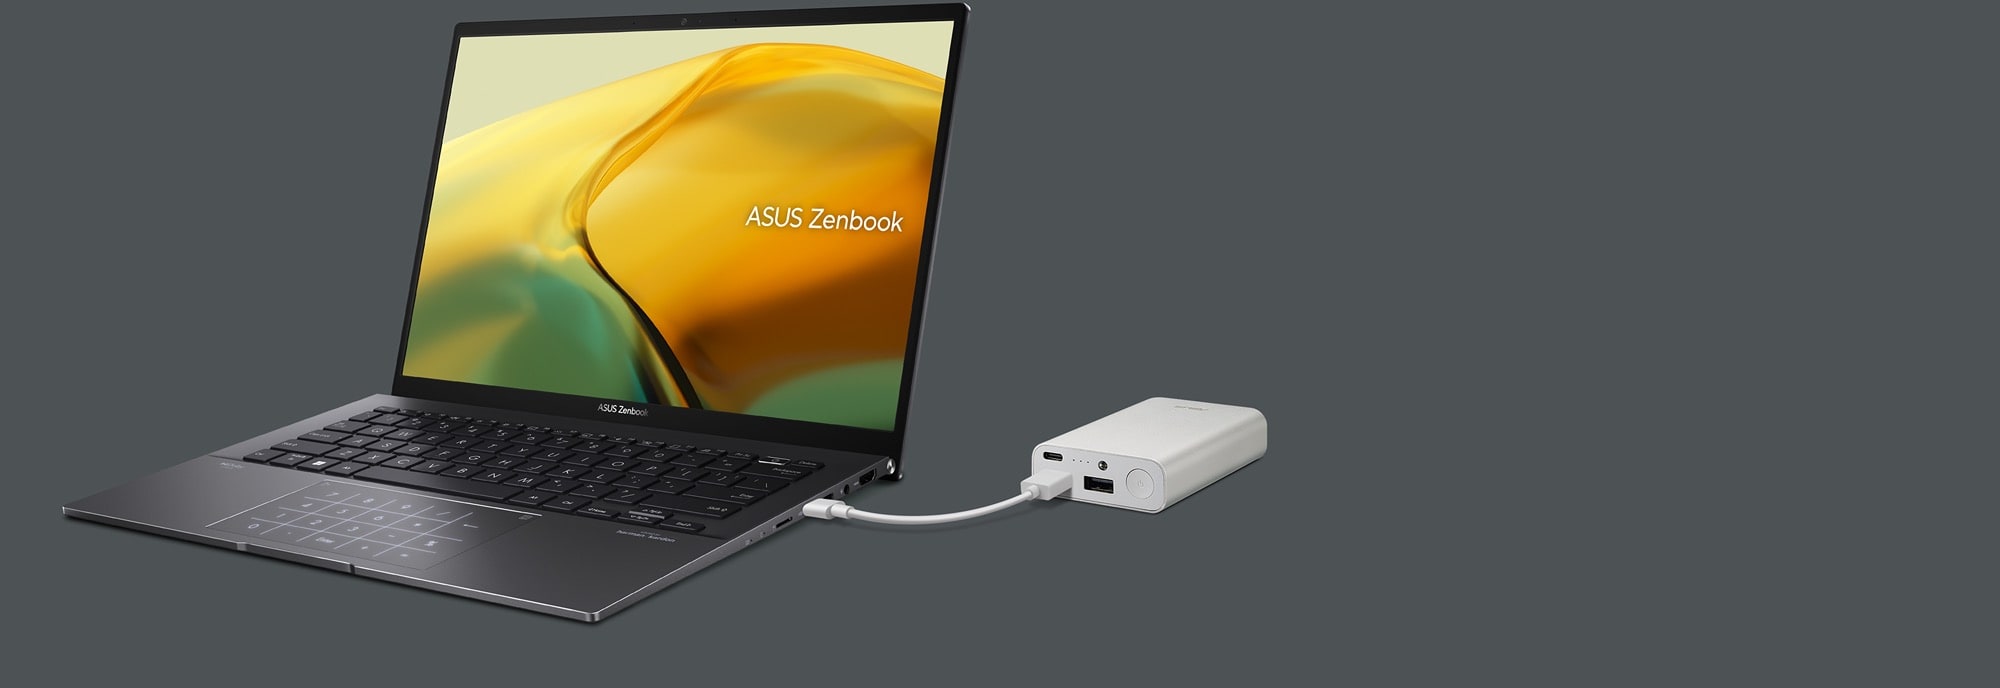 Zenbook 14 OLED in Jade Black, opened at 45 degrees and viewed from the rear. It is being charged via USB from a black power bank.